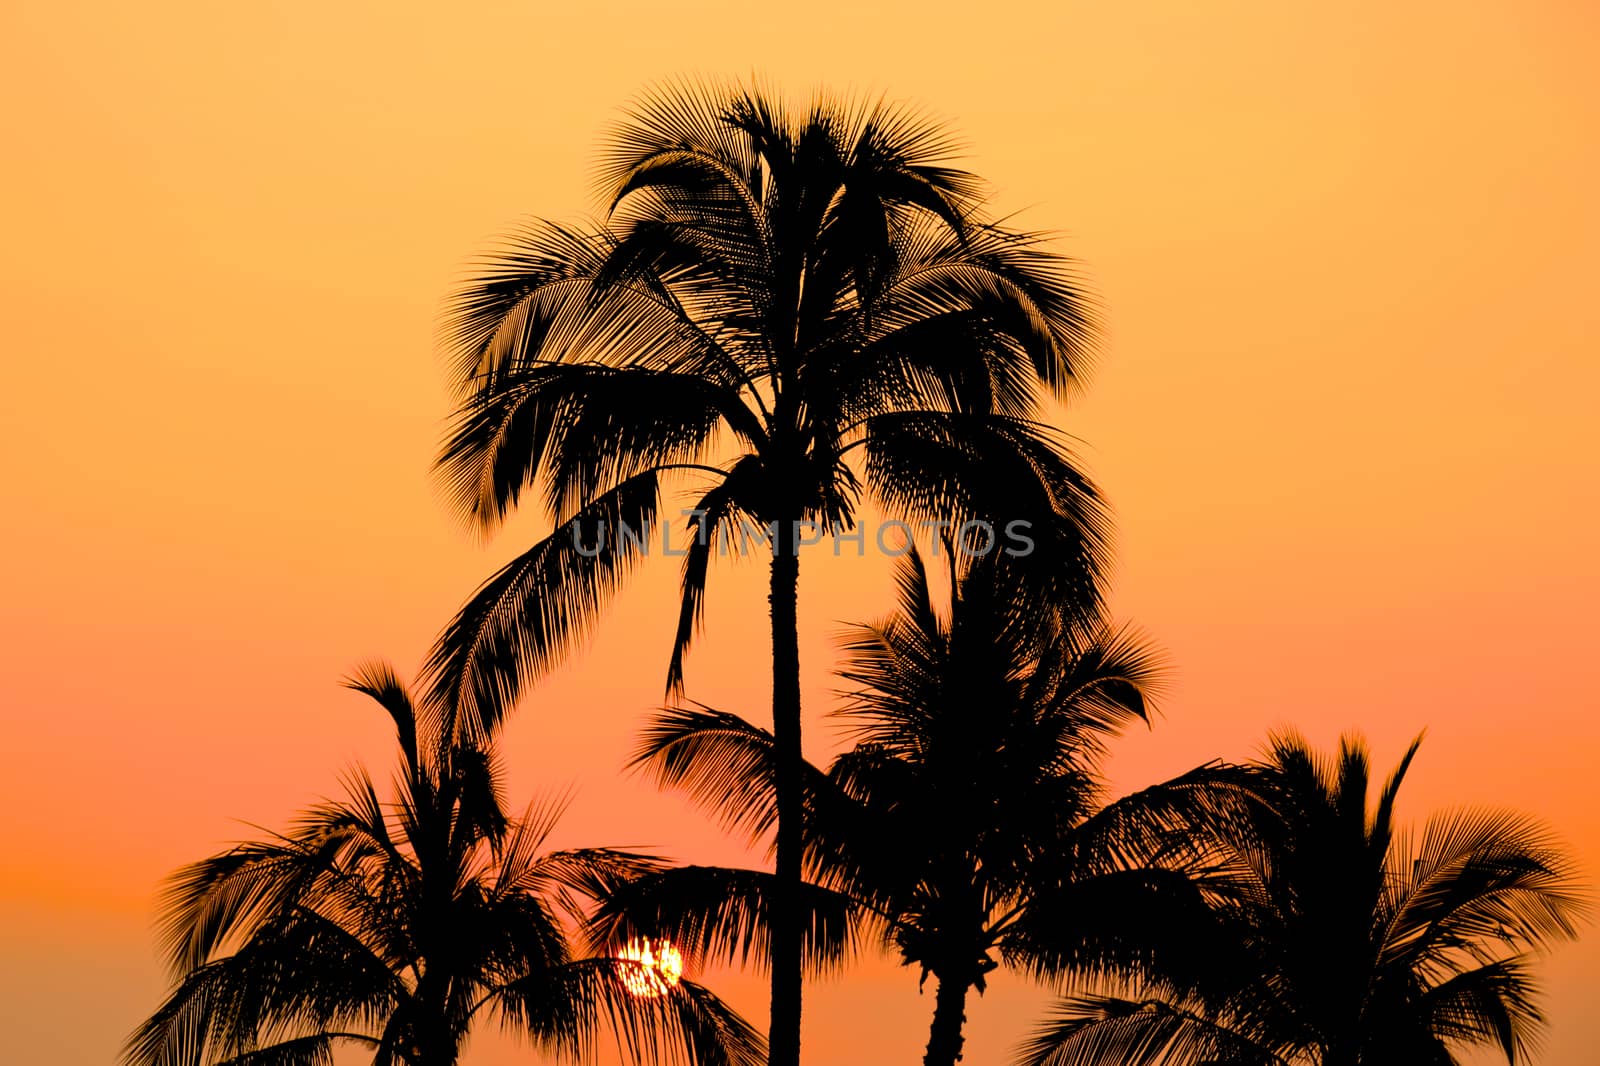 Silhouette of palm trees in Maui over a orange sunset